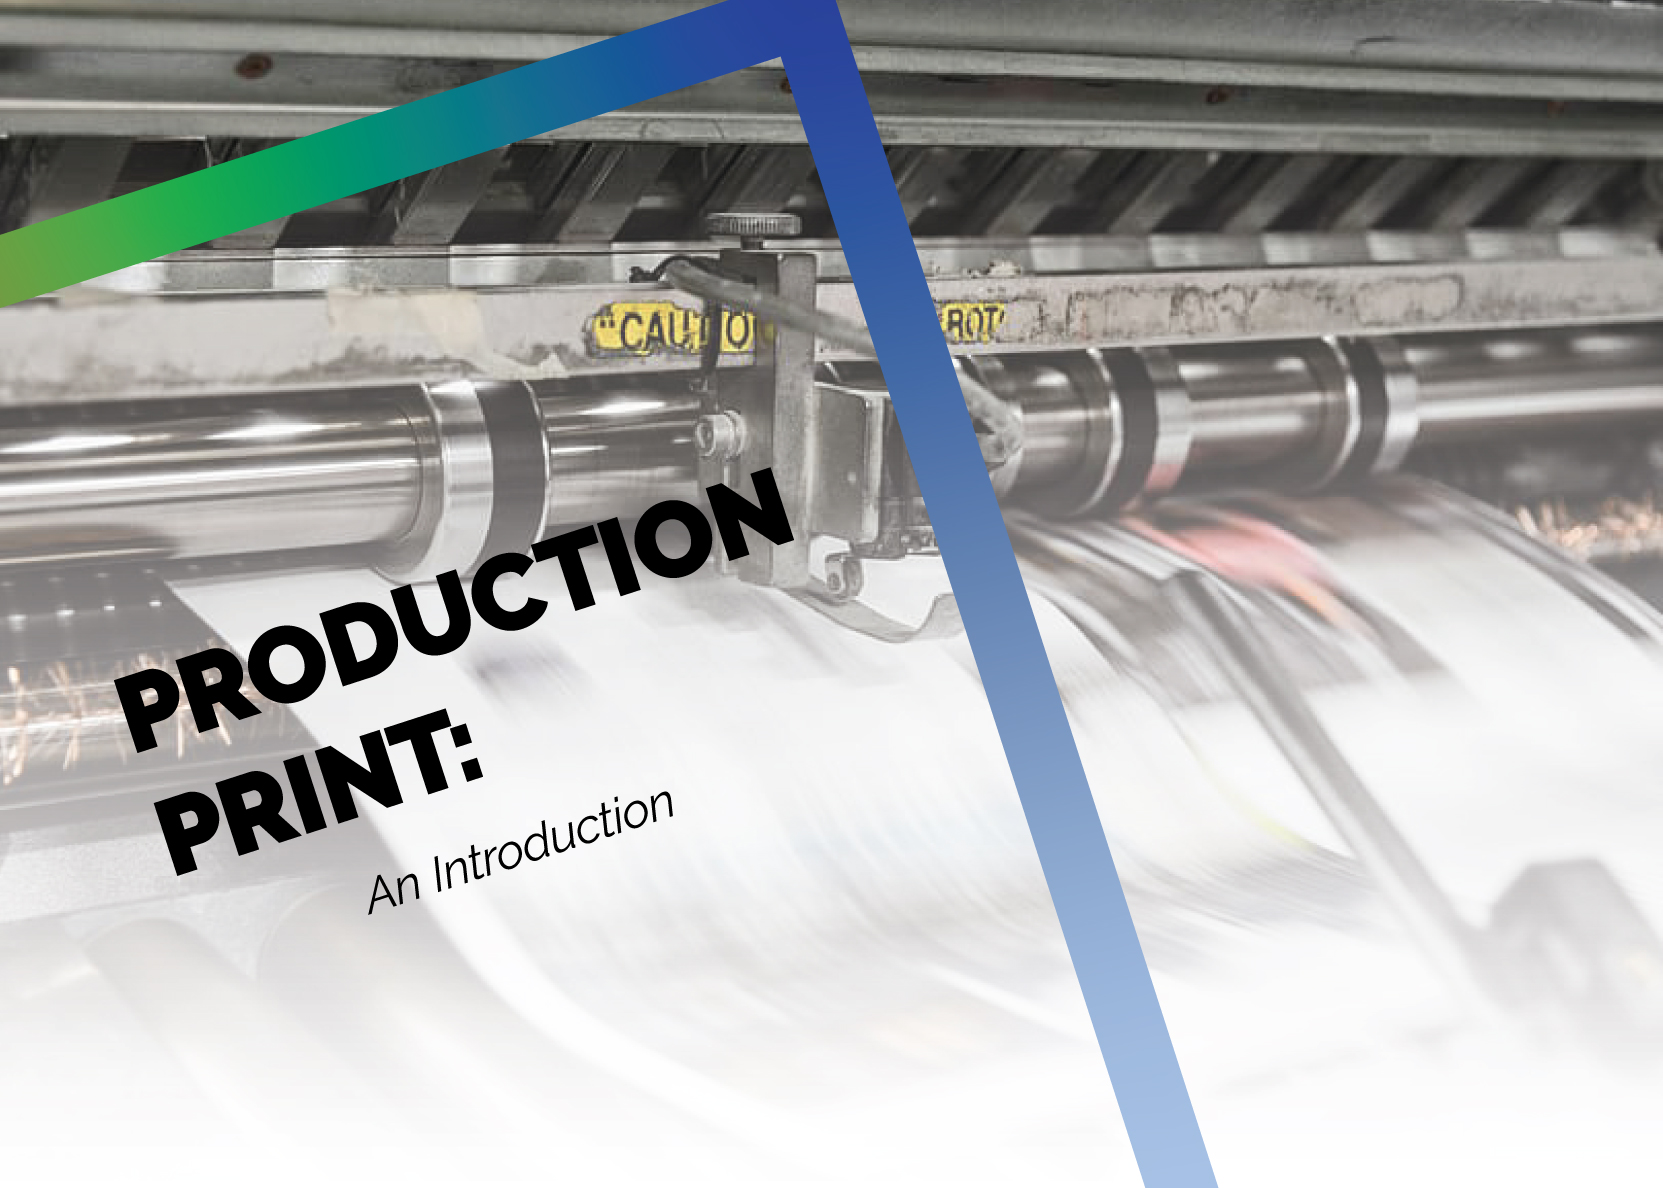 Production Print: An Introduction